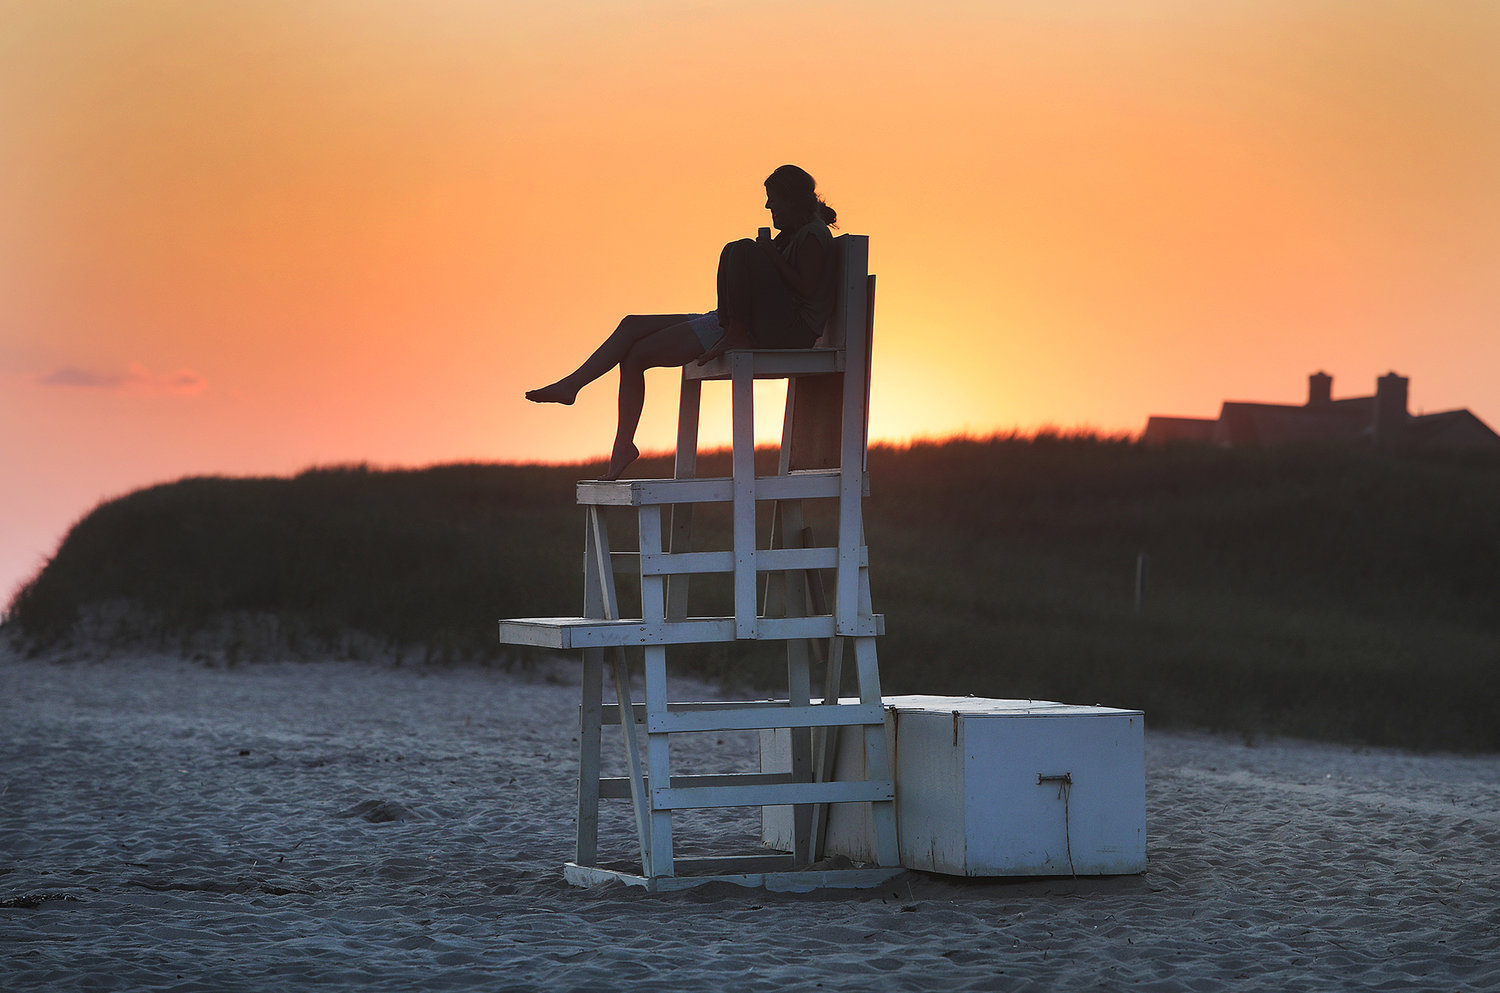 Enjoying the sunset from the Miacomet Beach lifeguard stand on an early August evening.